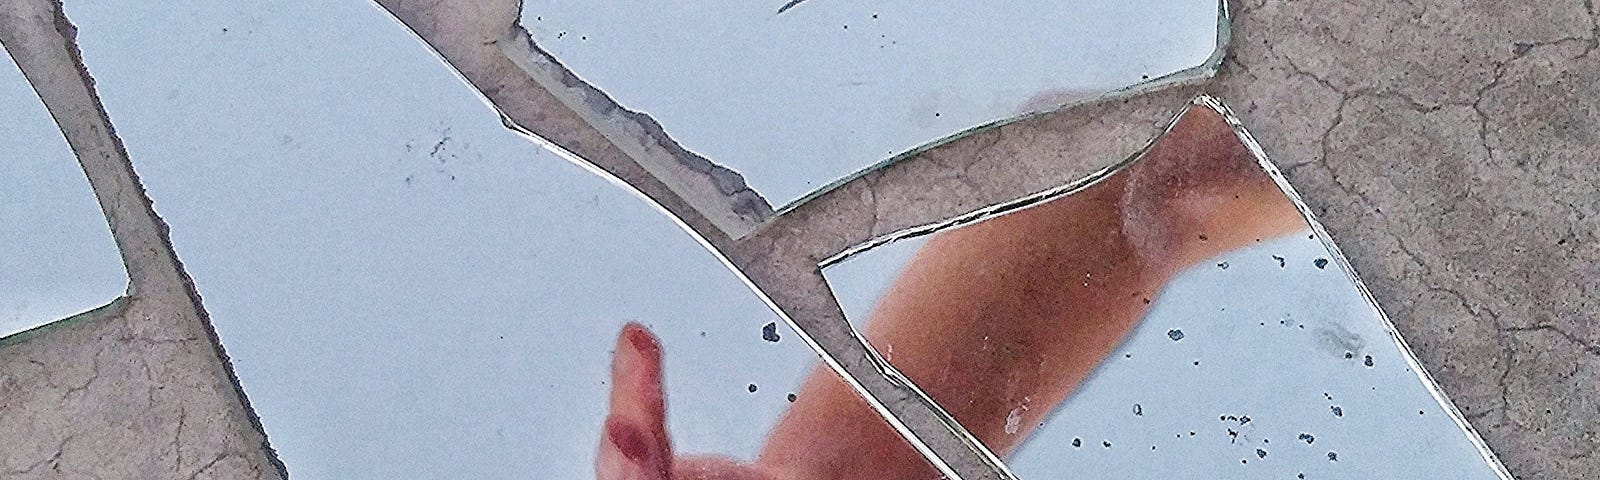 Mirror Fragments on Gray Surface With The Reflection Of A Person’s Hand